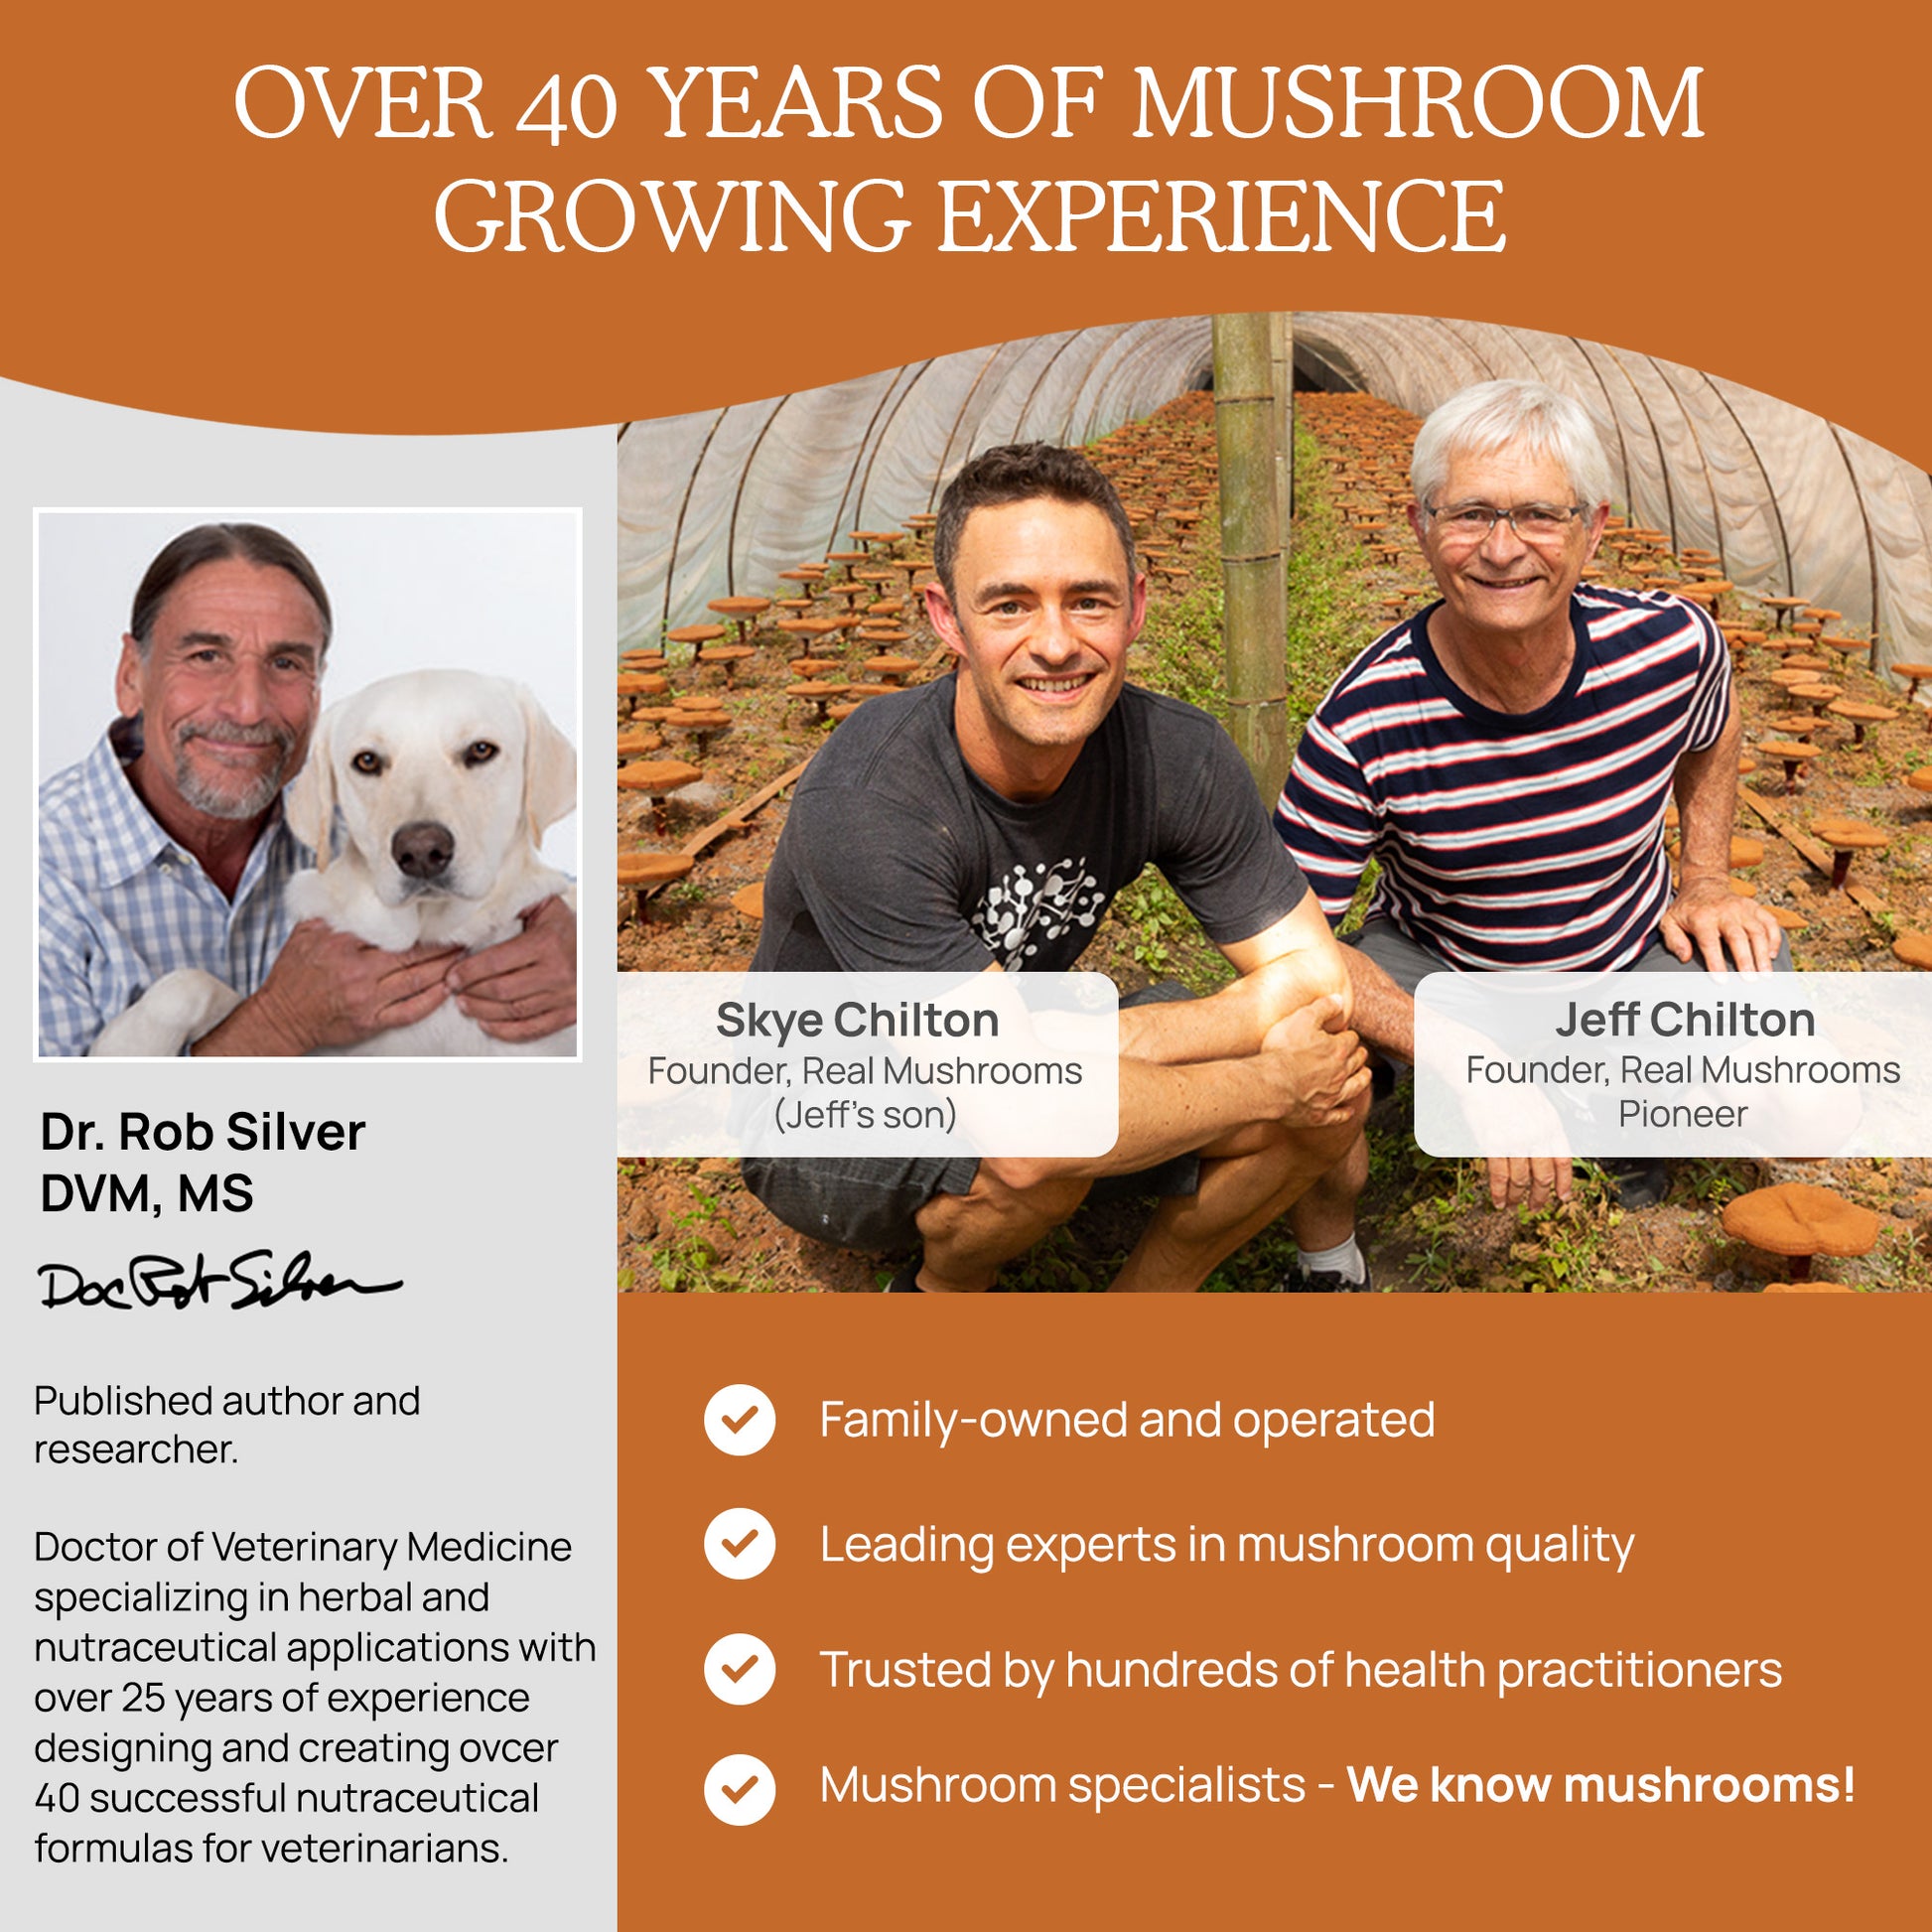 Three individuals associated with a mushroom-growing enterprise, highlighting their experience and contributions in the field of mycology and healthcare, particularly through their work with Real Mushrooms' USDA Certified Organic Cordyceps militaris.